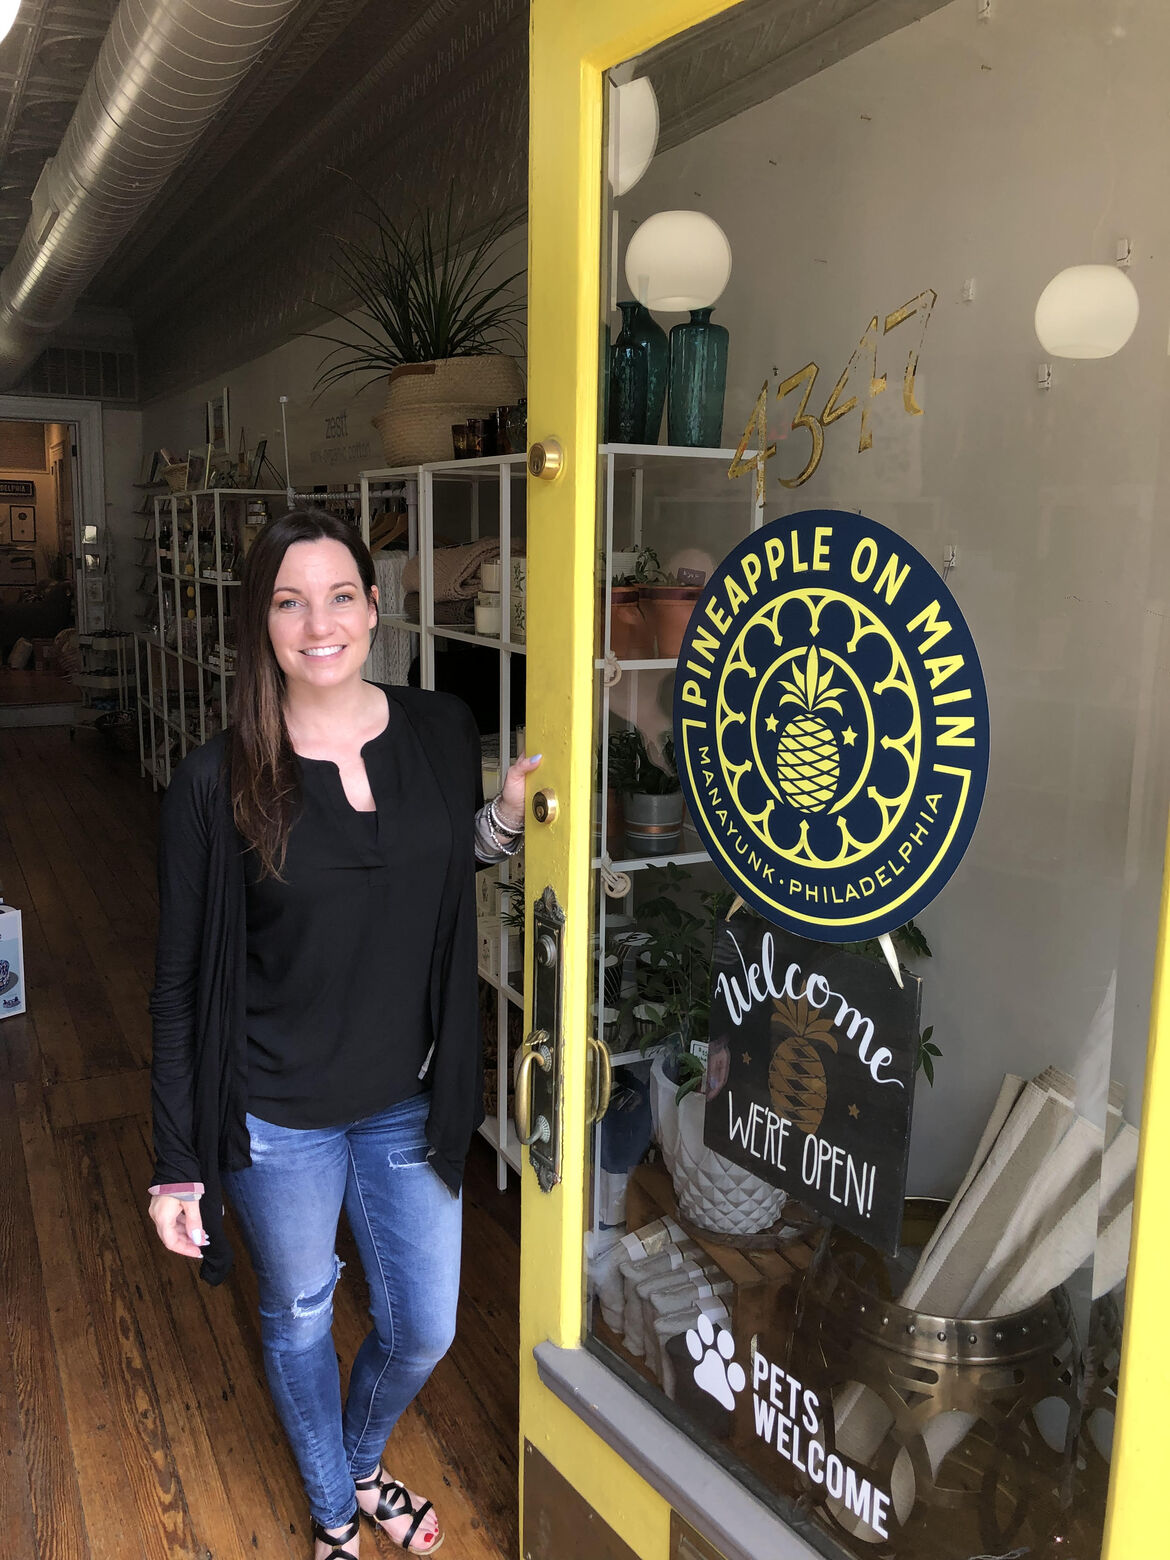 FACES OF MNYK: Meet Kathy, Owner of Pineapple on Main!